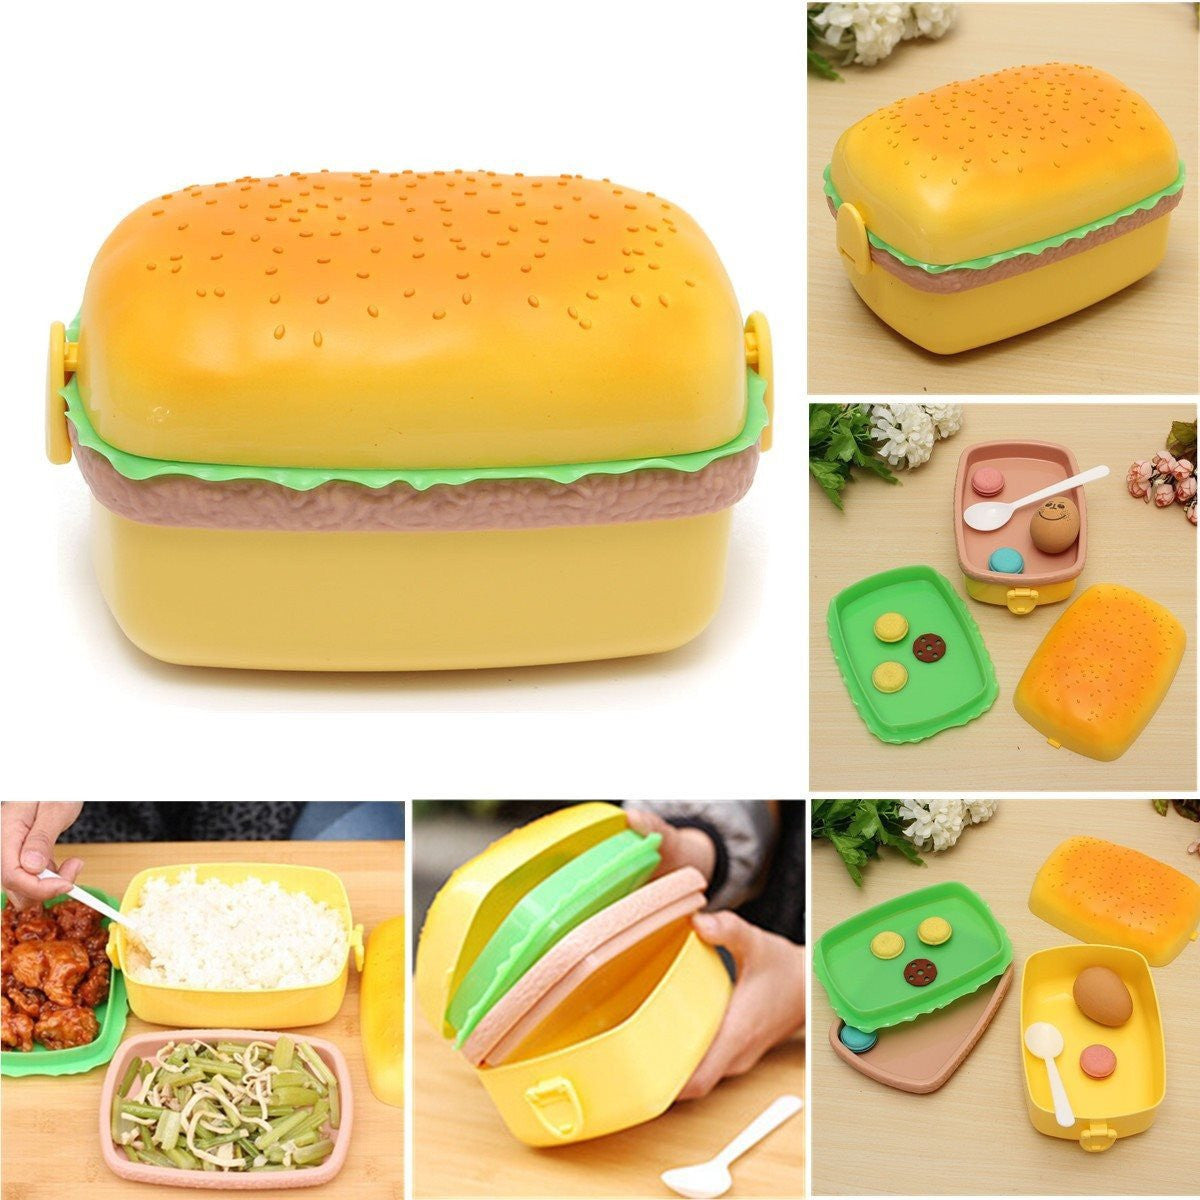 700ML Huge Hamburger Novelty for BigMac Portable Lunch Box Food Picnic Container Storage+Spoon Children Kid Favorite